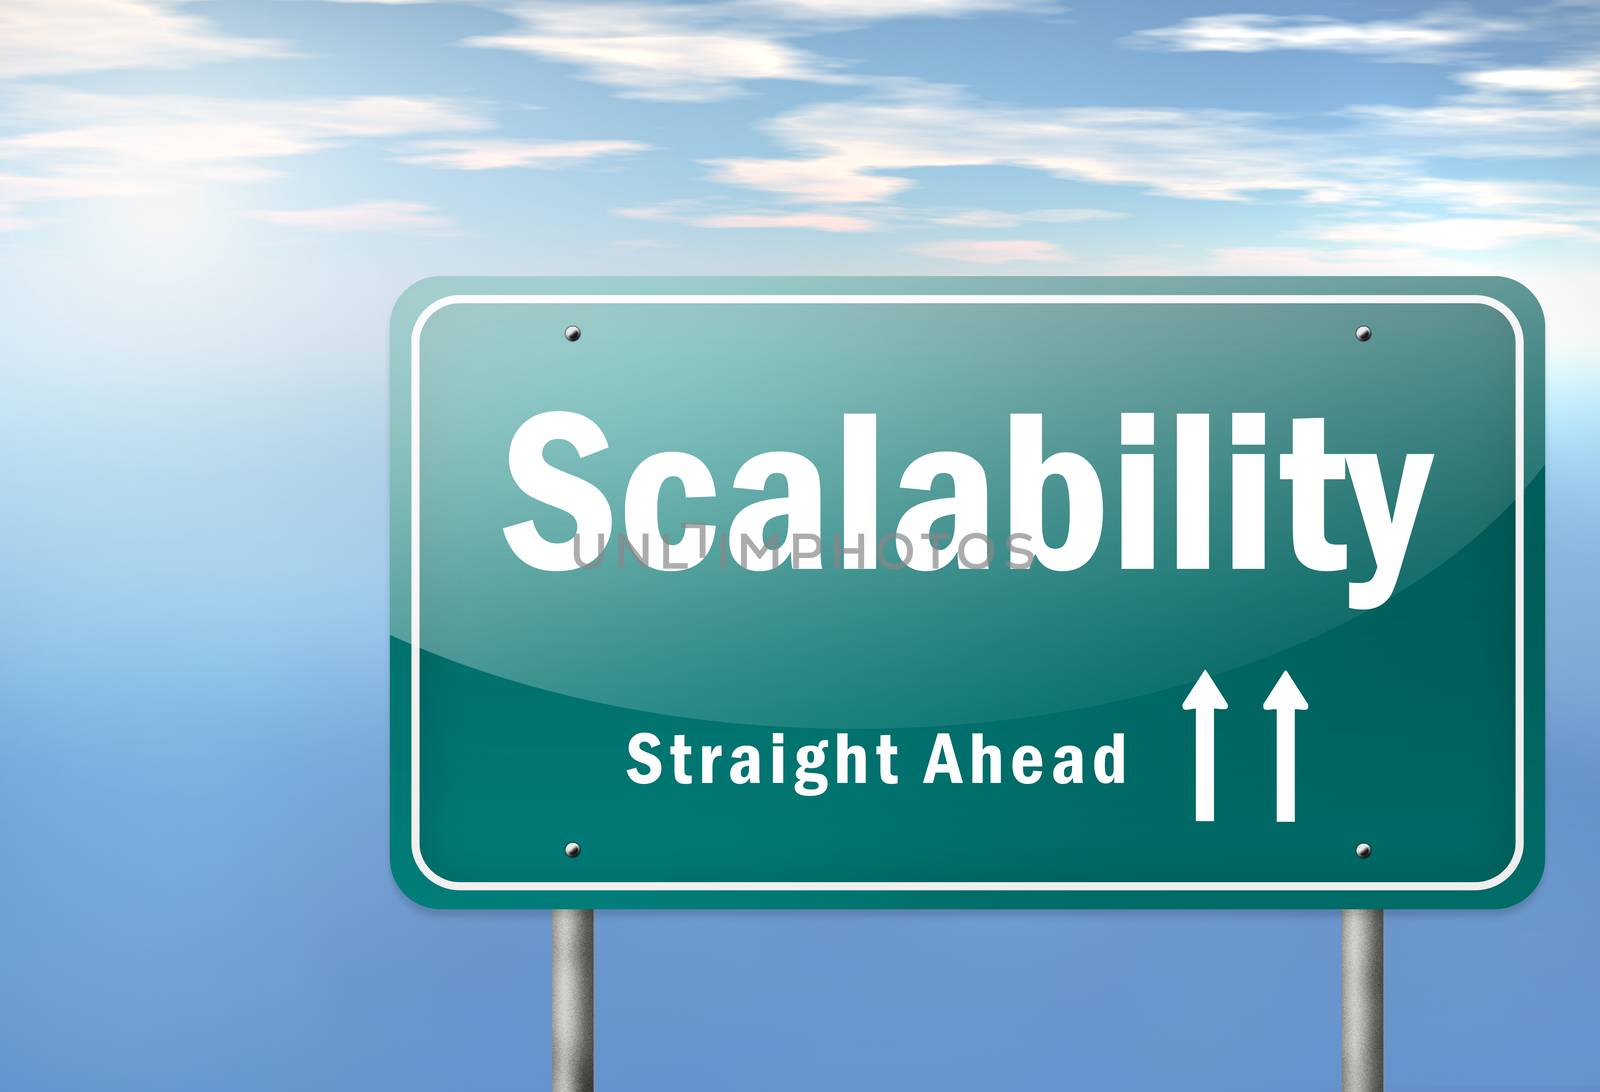 Highway Signpost "Scalability" by mindscanner